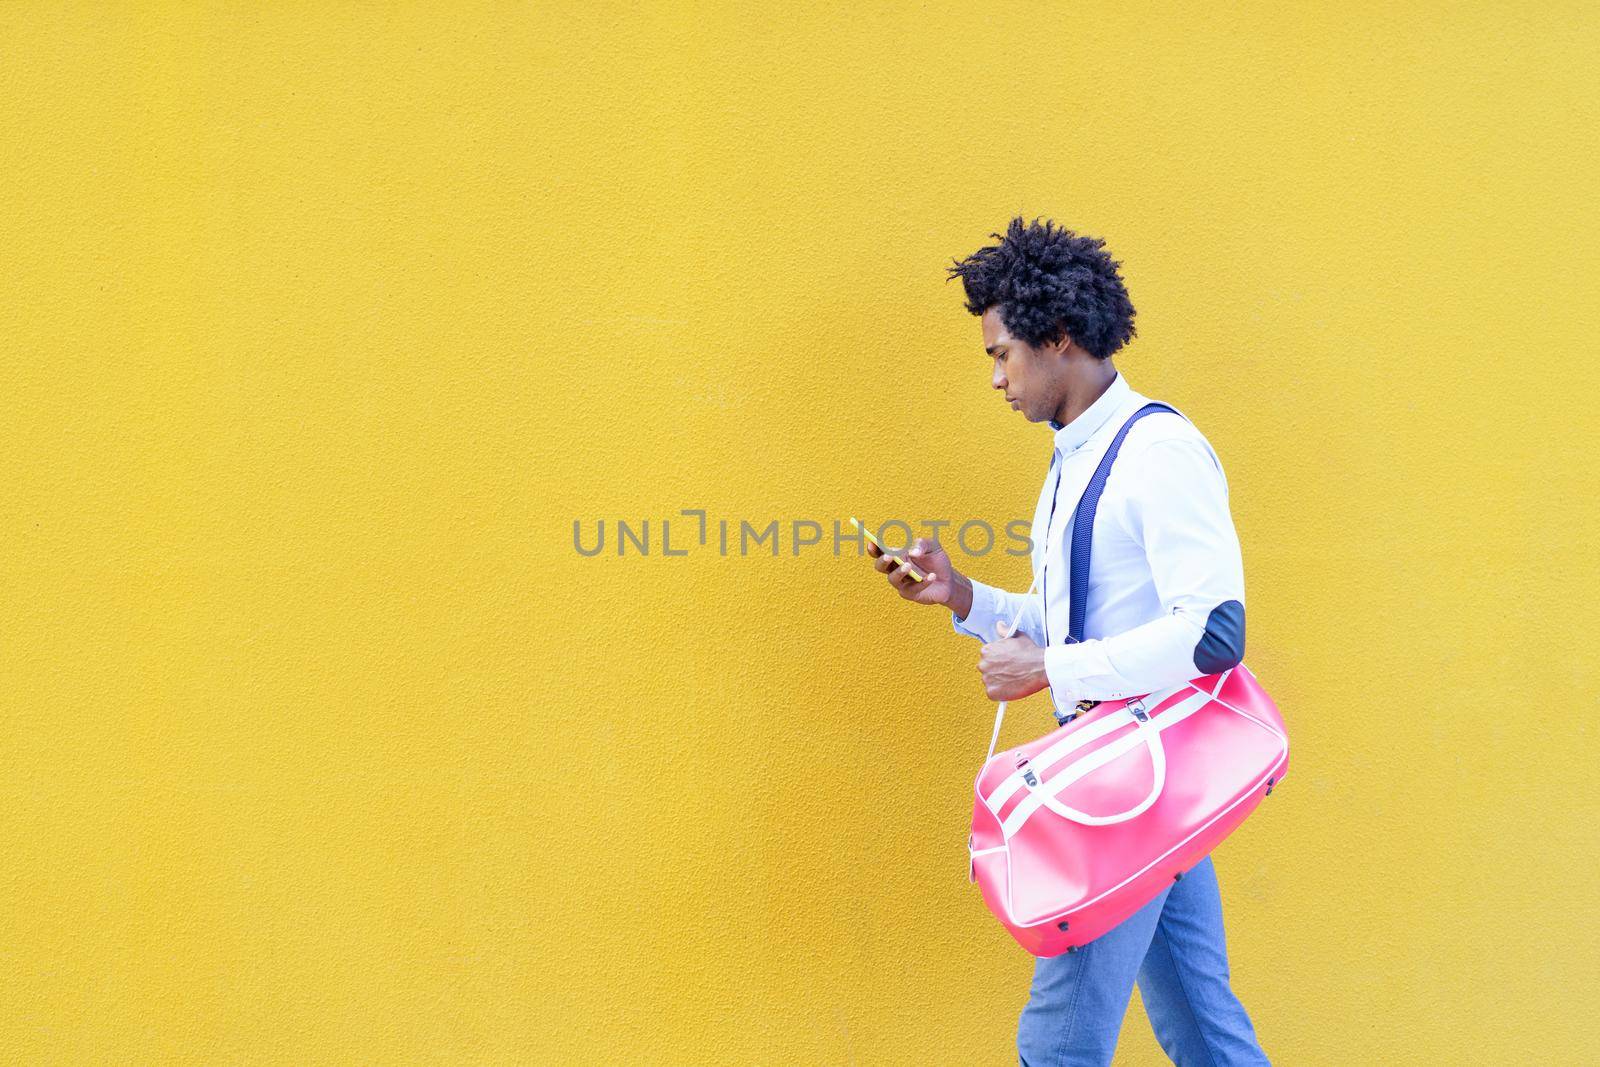 Black man with afro hairstyle carrying a sports bag and smartphone against a yellow urban background. Guy with curly hair wearing shirt and suspenders.